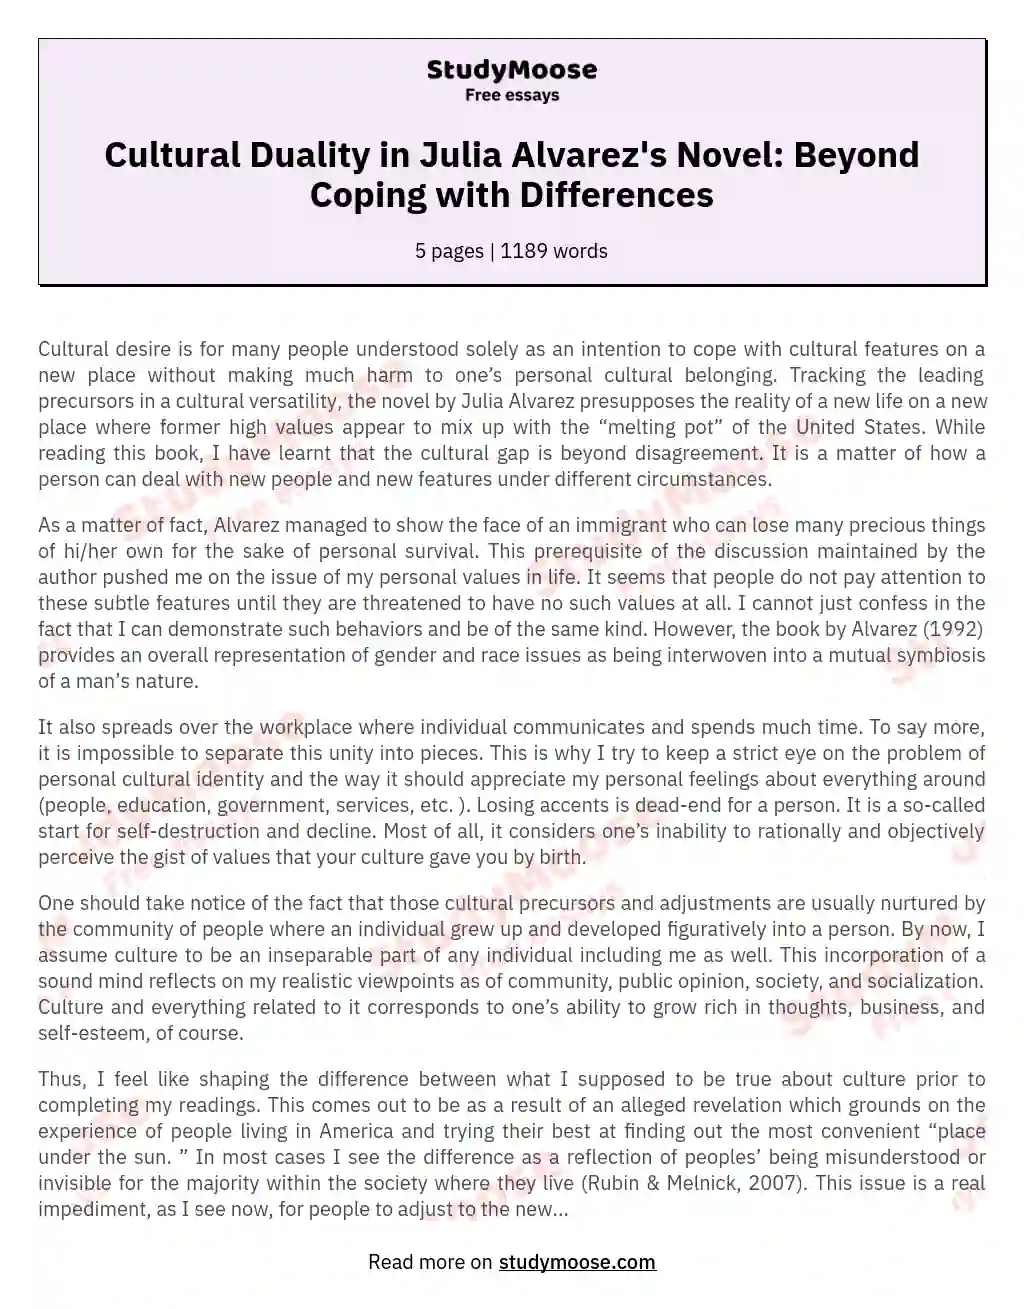 Cultural Duality in Julia Alvarez's Novel: Beyond Coping with Differences essay